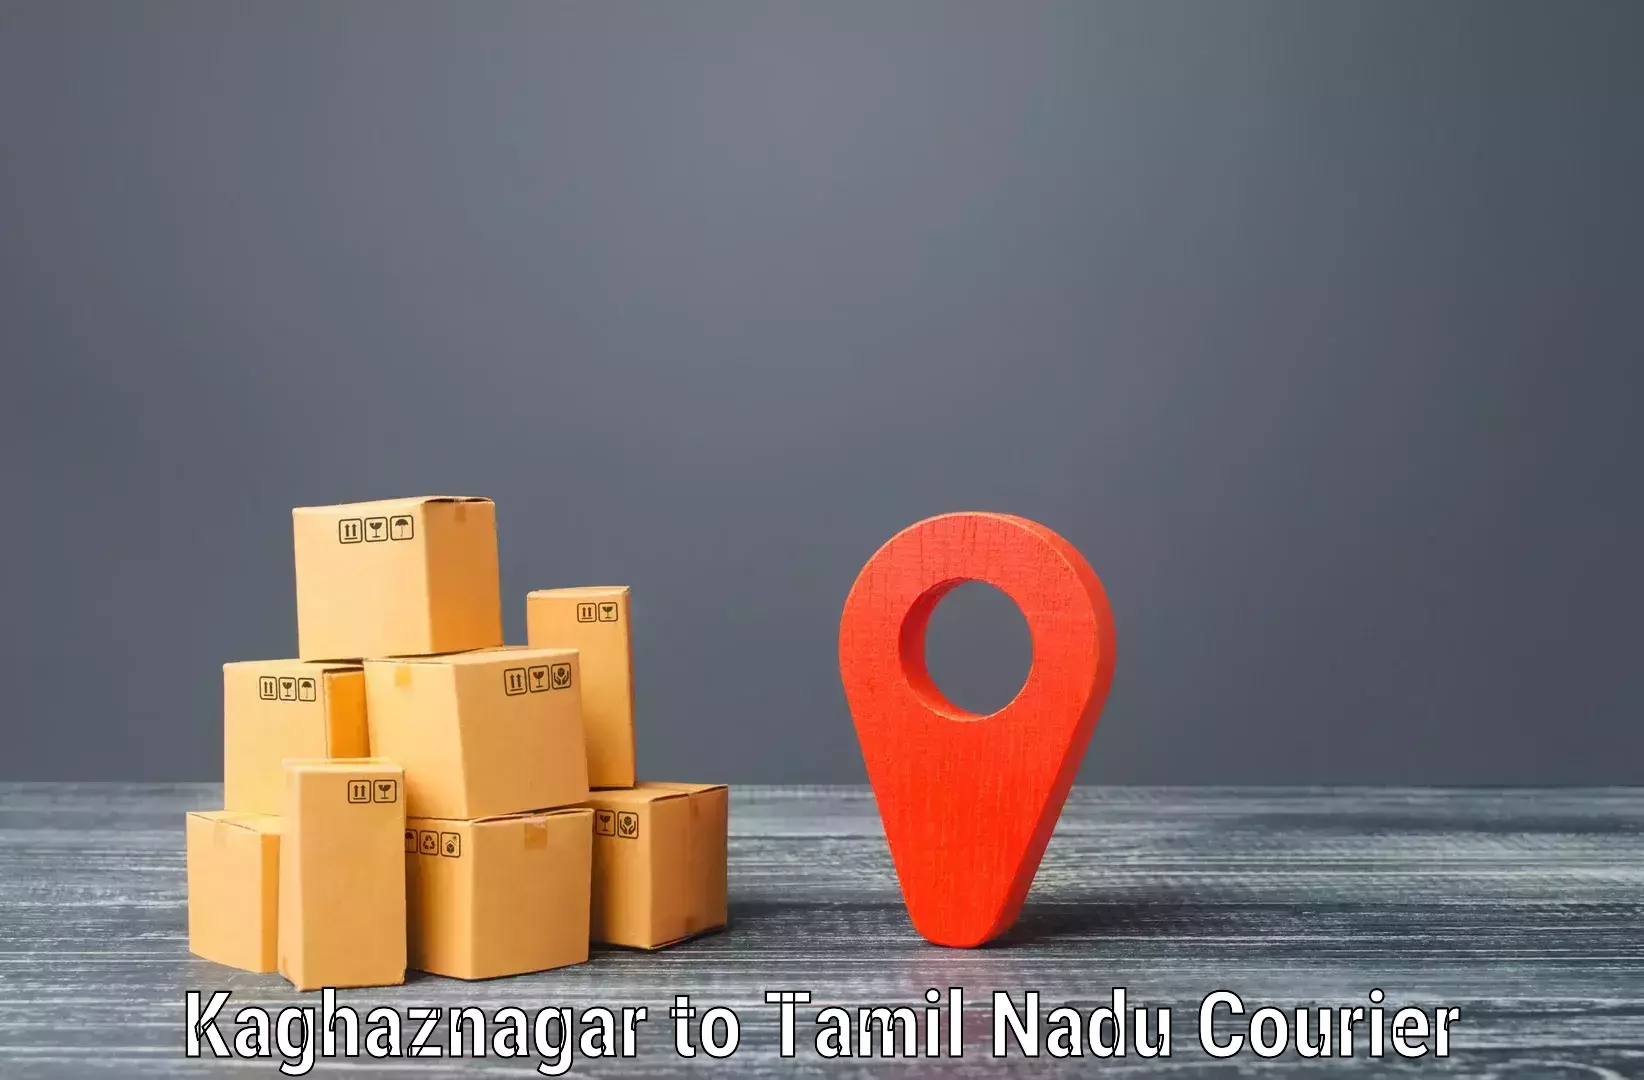 Personalized courier experiences Kaghaznagar to Perambalur